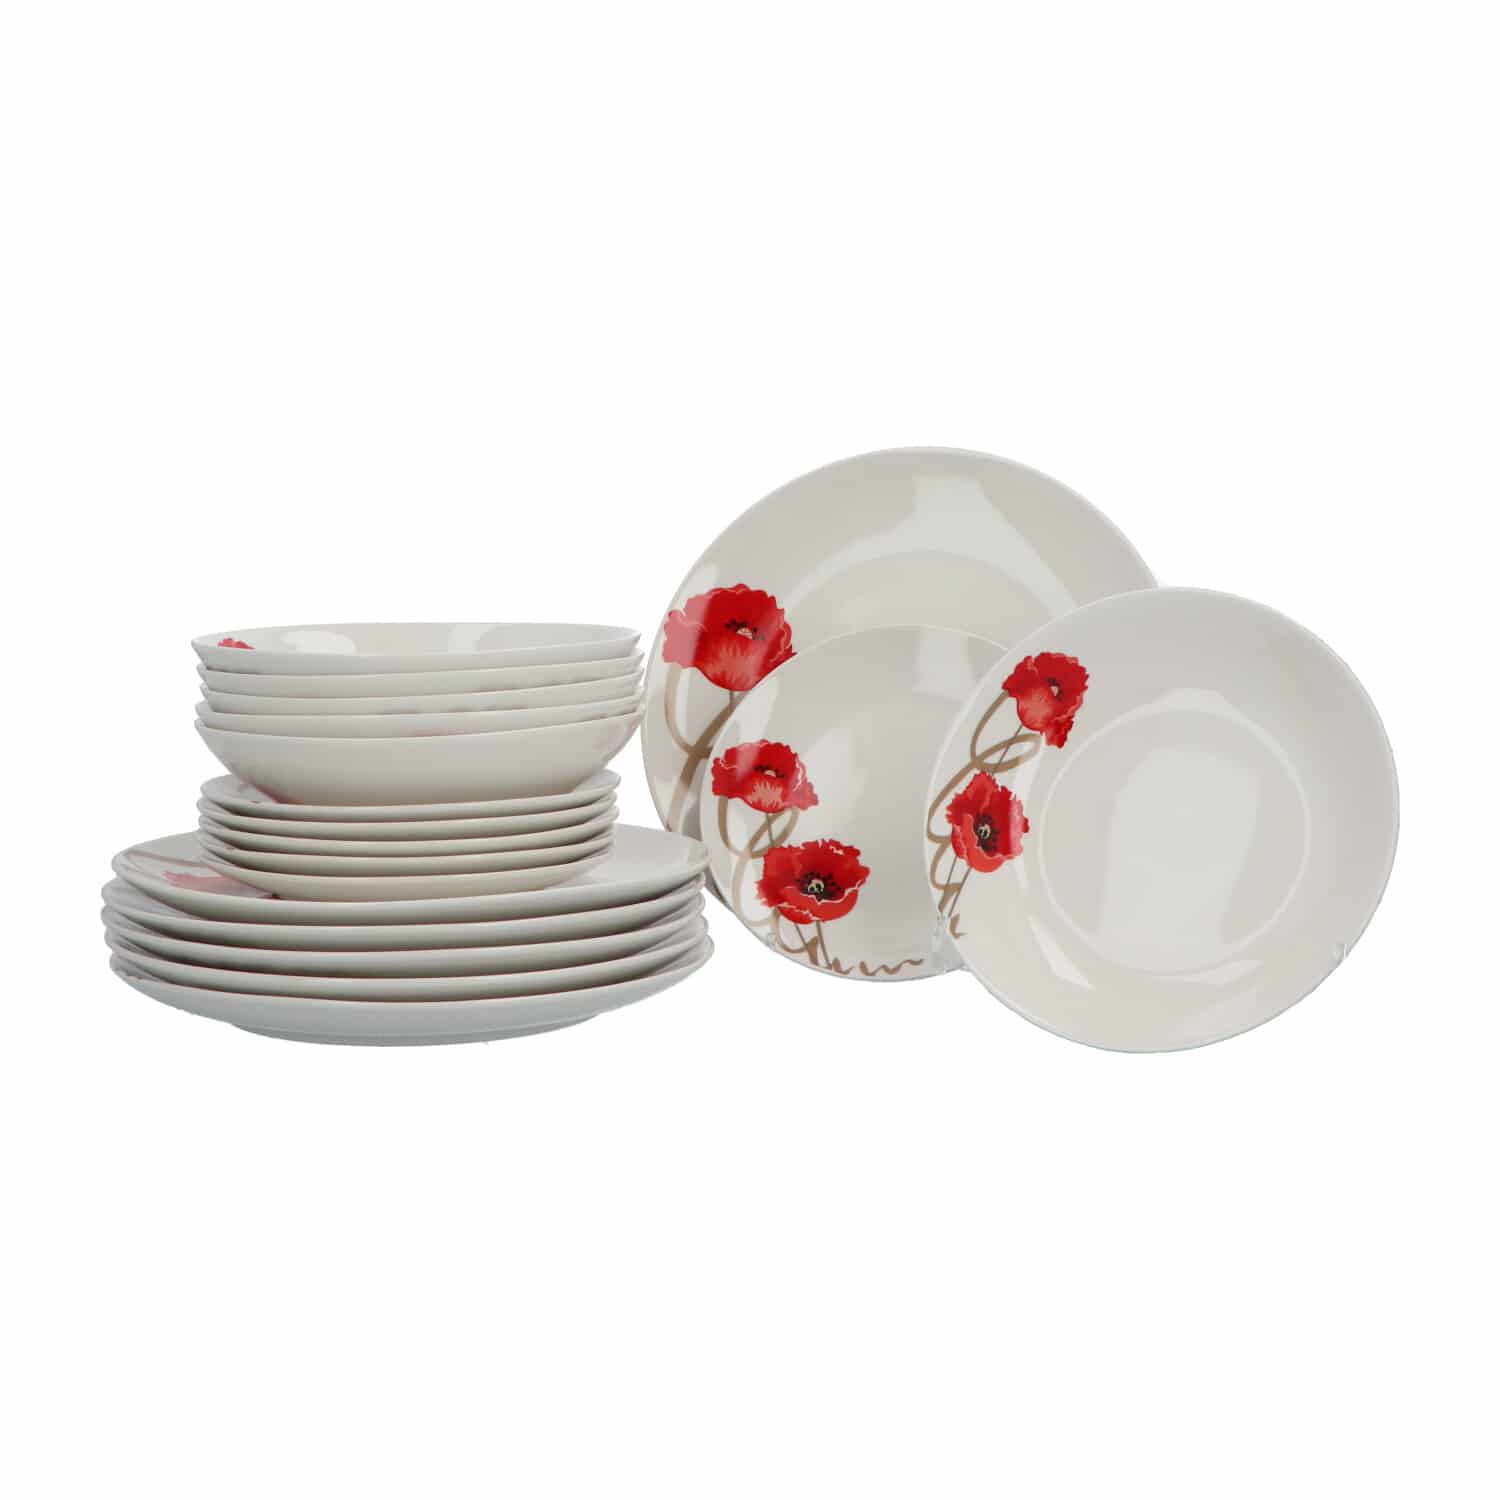 Maxime Home Klaproos servies 6 persoons 18 delig - Wit/Rood